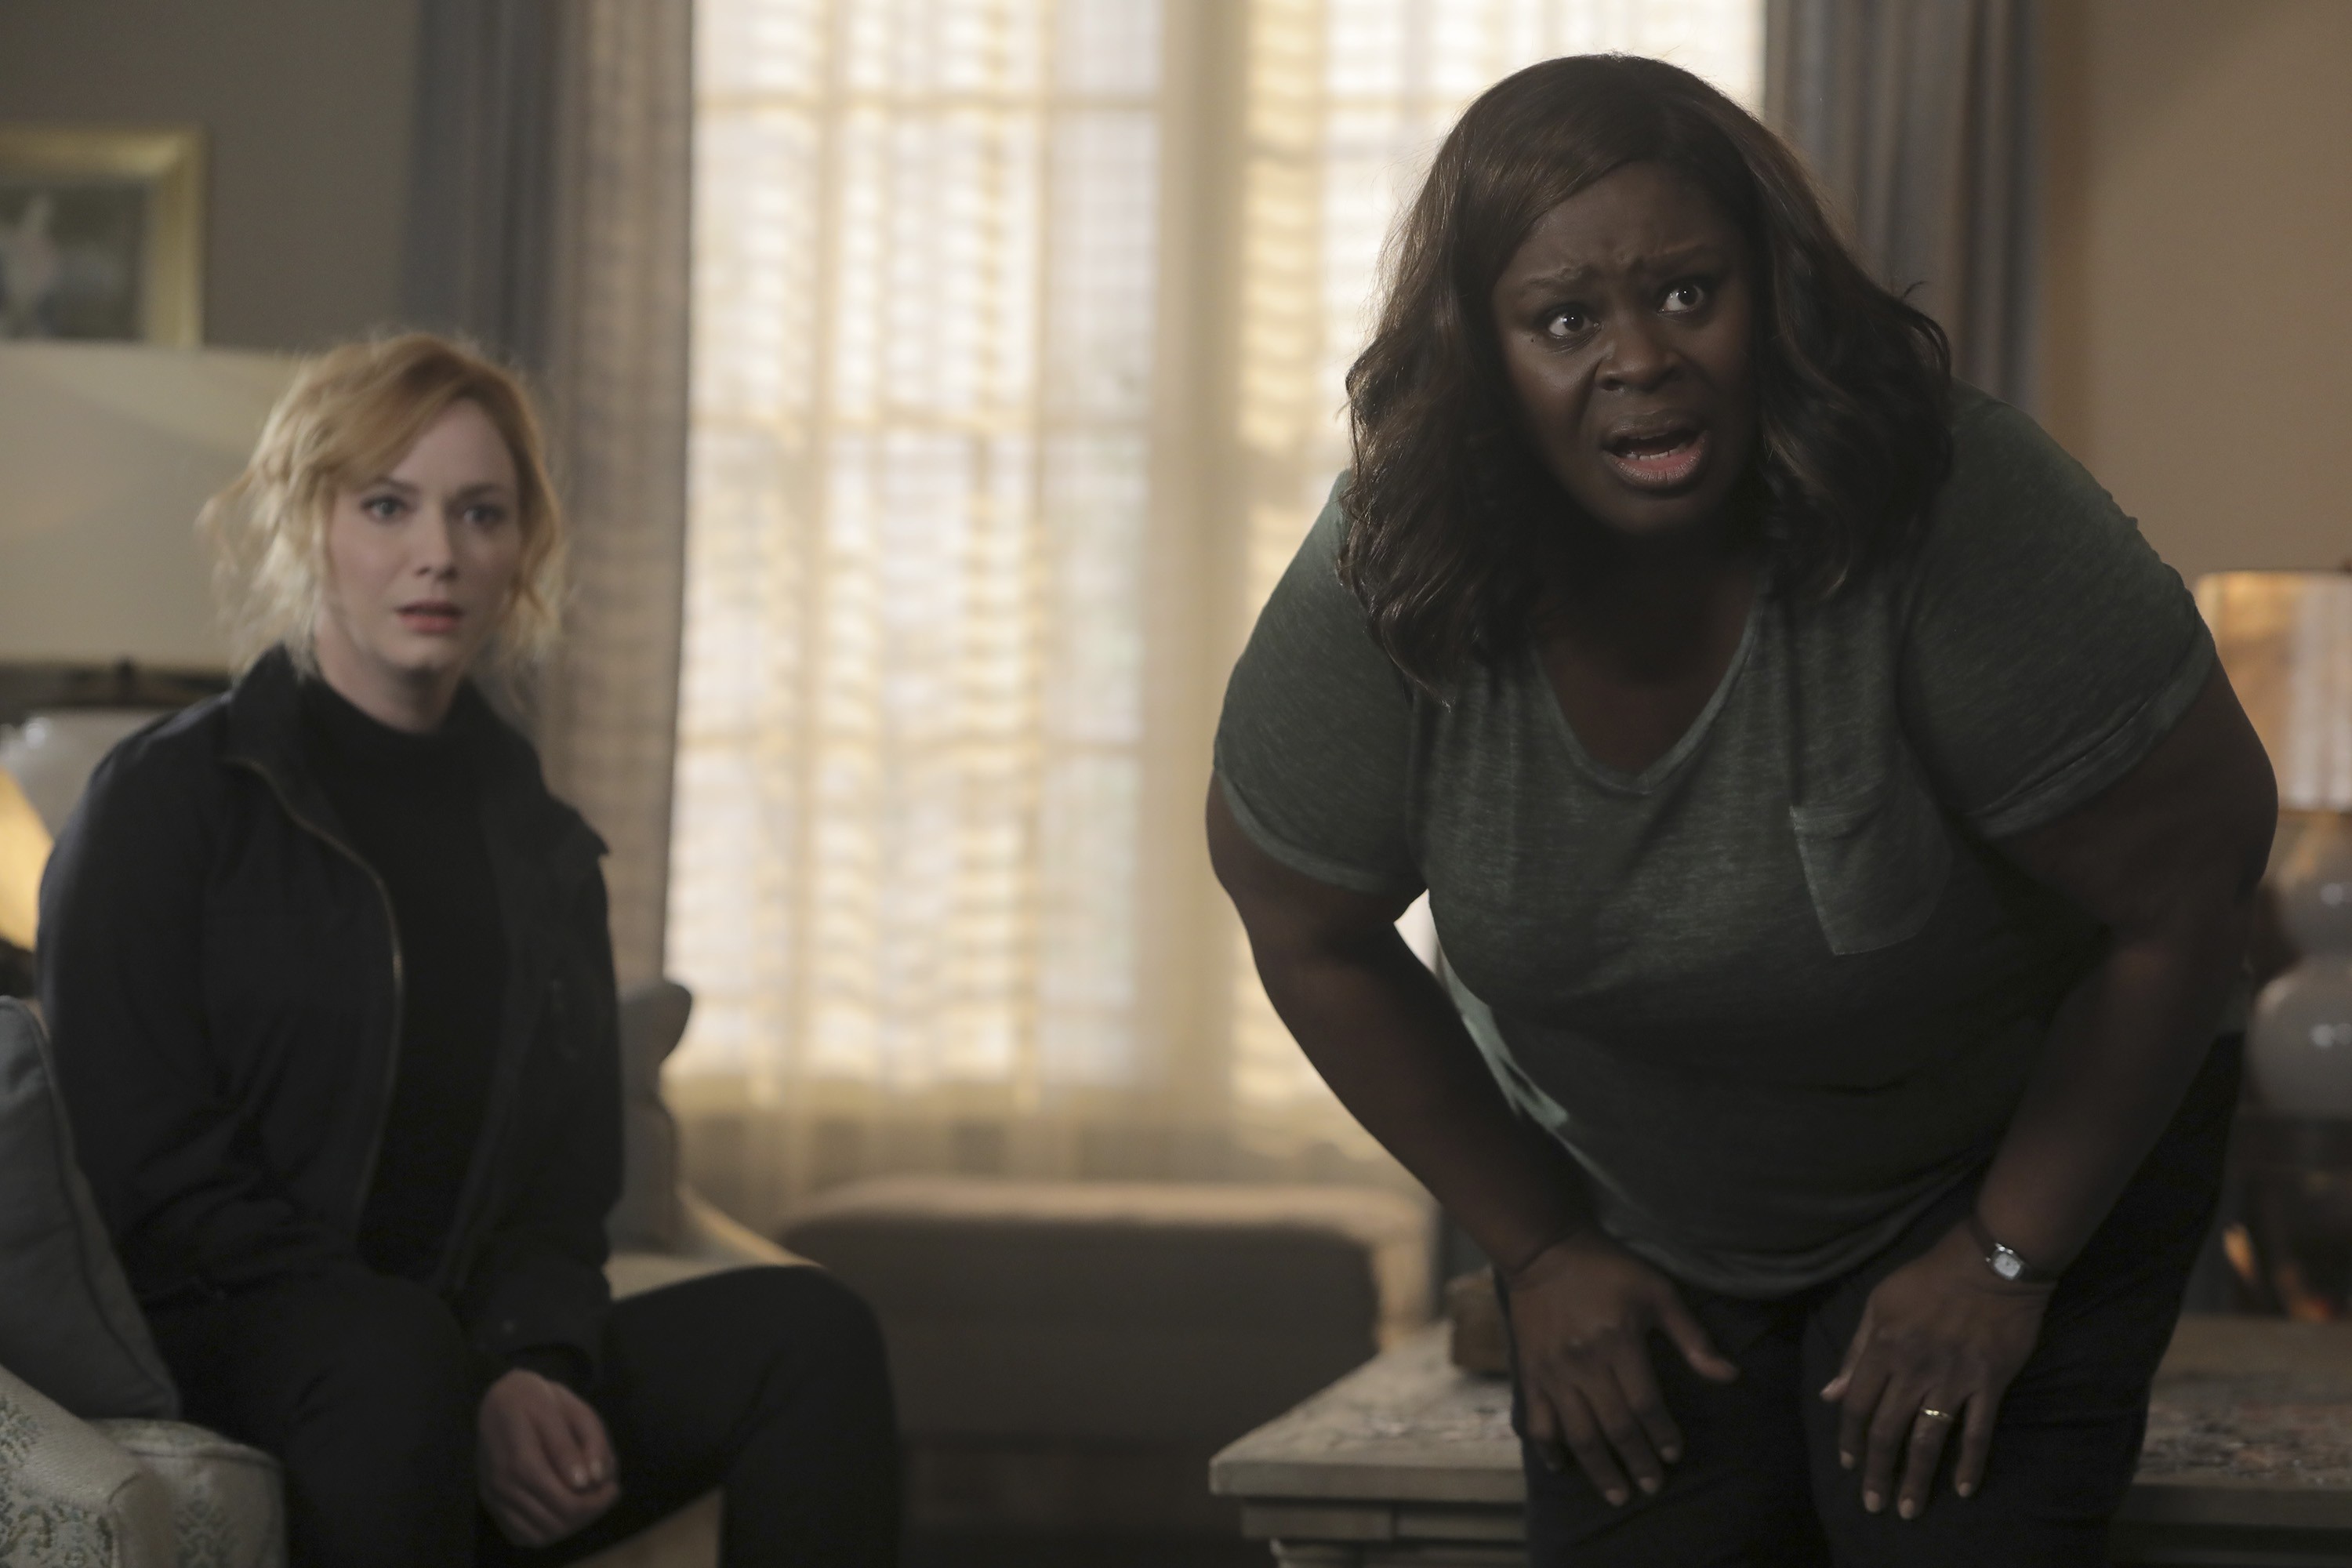 Christina Hendricks (left) and Retta play suburban women who decide to rob a supermarket in Good Girls, an NBC show that also stars Mae Whitman and may be a comedy or a drama or another dramedy. - JOSH STRINGER/COURTESY OF NBC